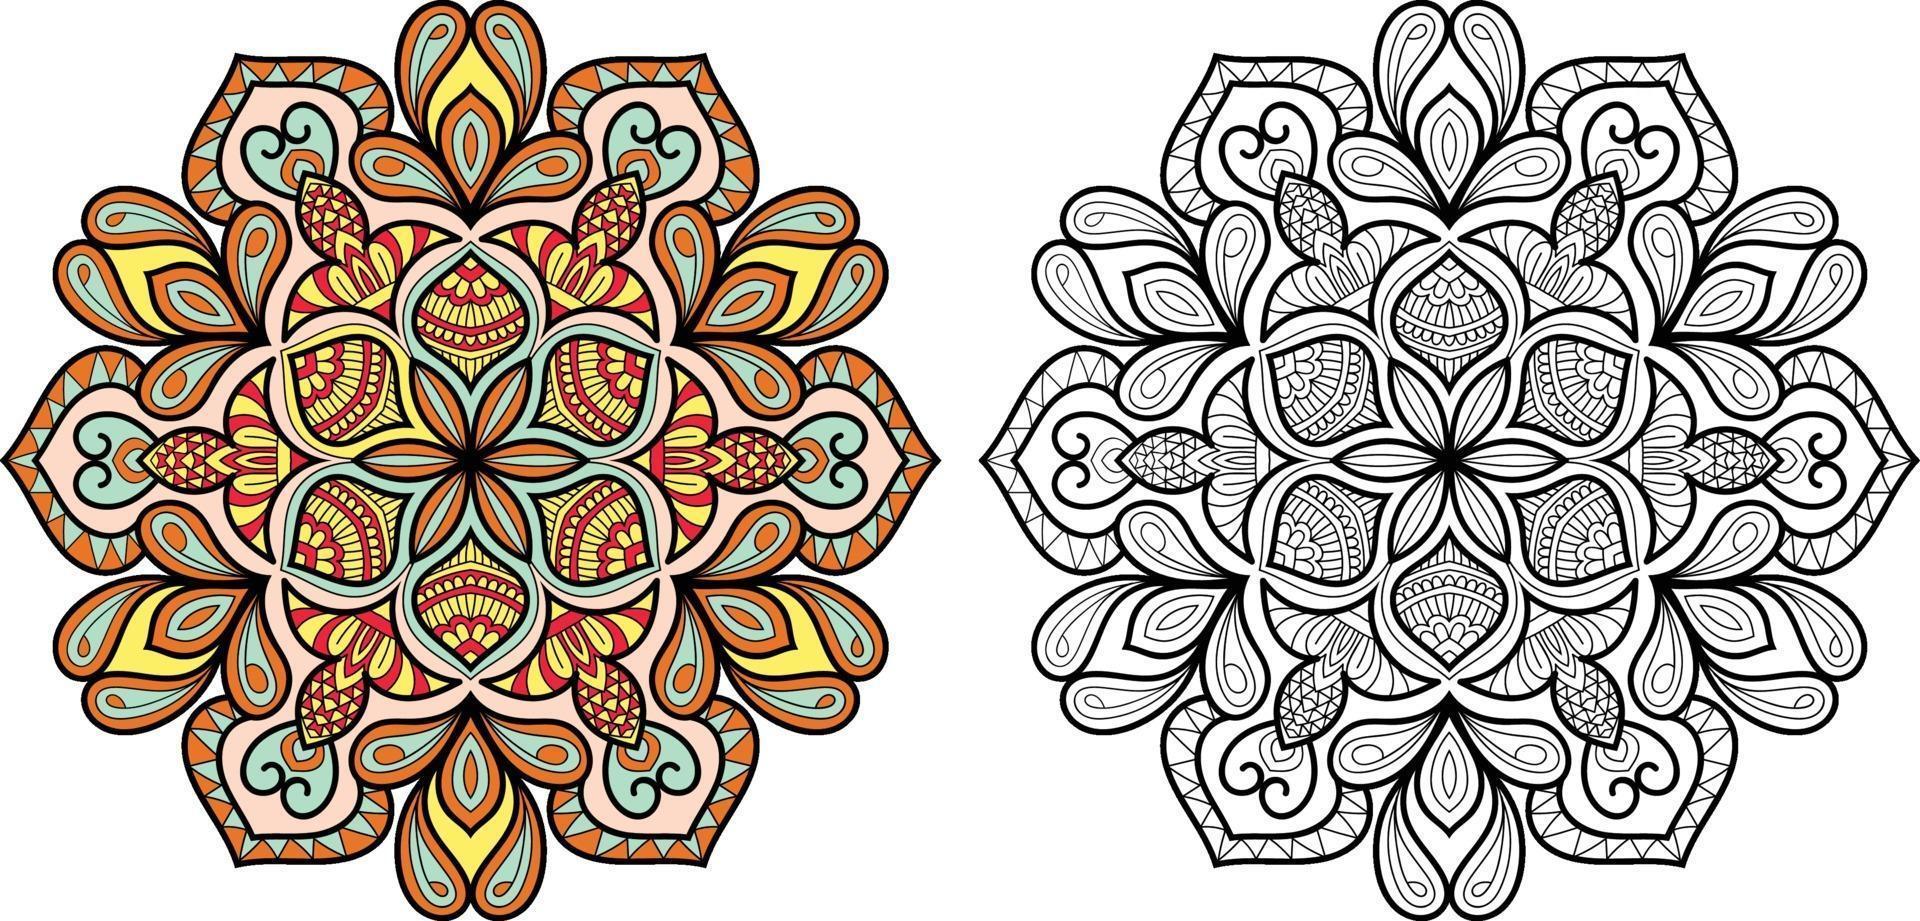 Doodle Mandala colouring book page for adults and children. white and black round decorative. Oriental Anti-stress therapy patterns. abstract zen tangle. Yoga meditation Vector illustration.